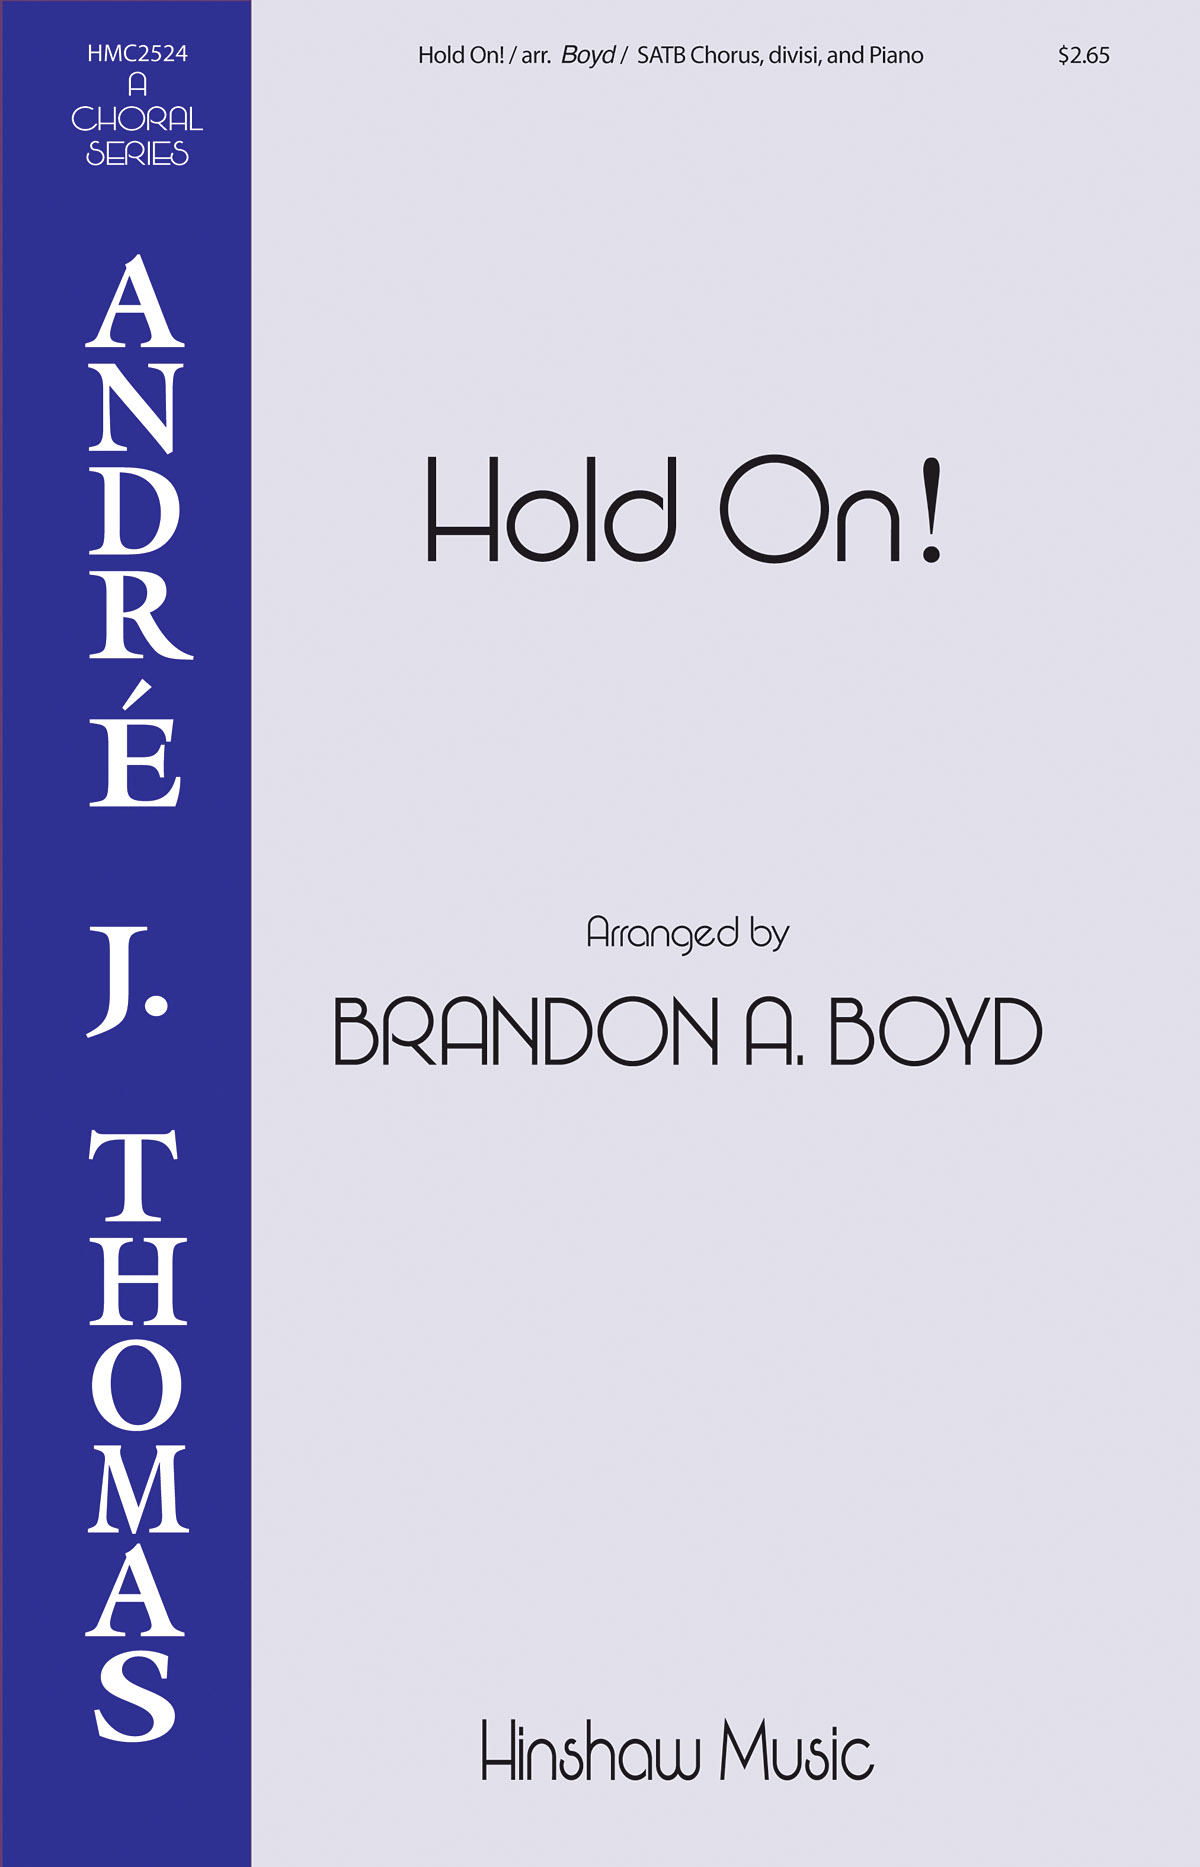 Hold On: Mixed Choir a Cappella: Vocal Score